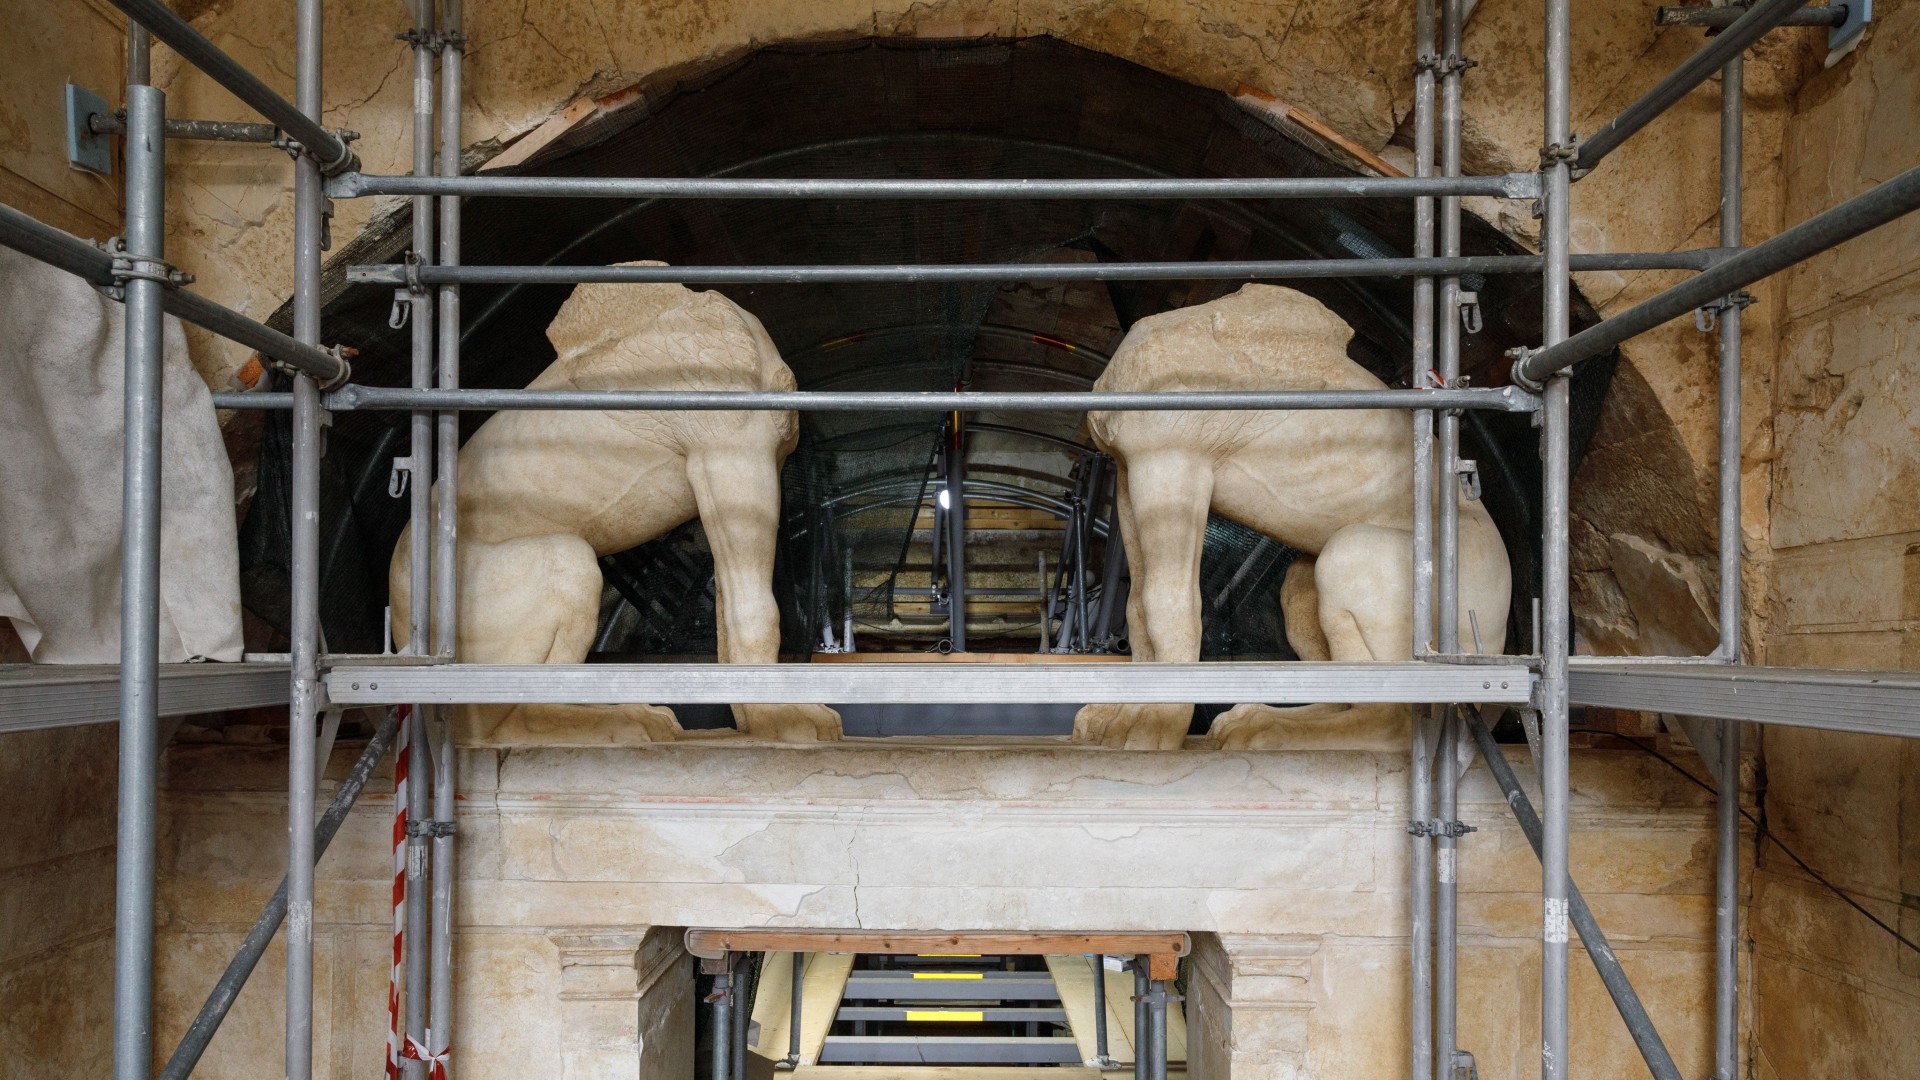 View of the two sphinxes at the entrance of the first chamber of Kasta Tomb near Nea Mesolakkia village, Serres, Greece on April 19, 2023.